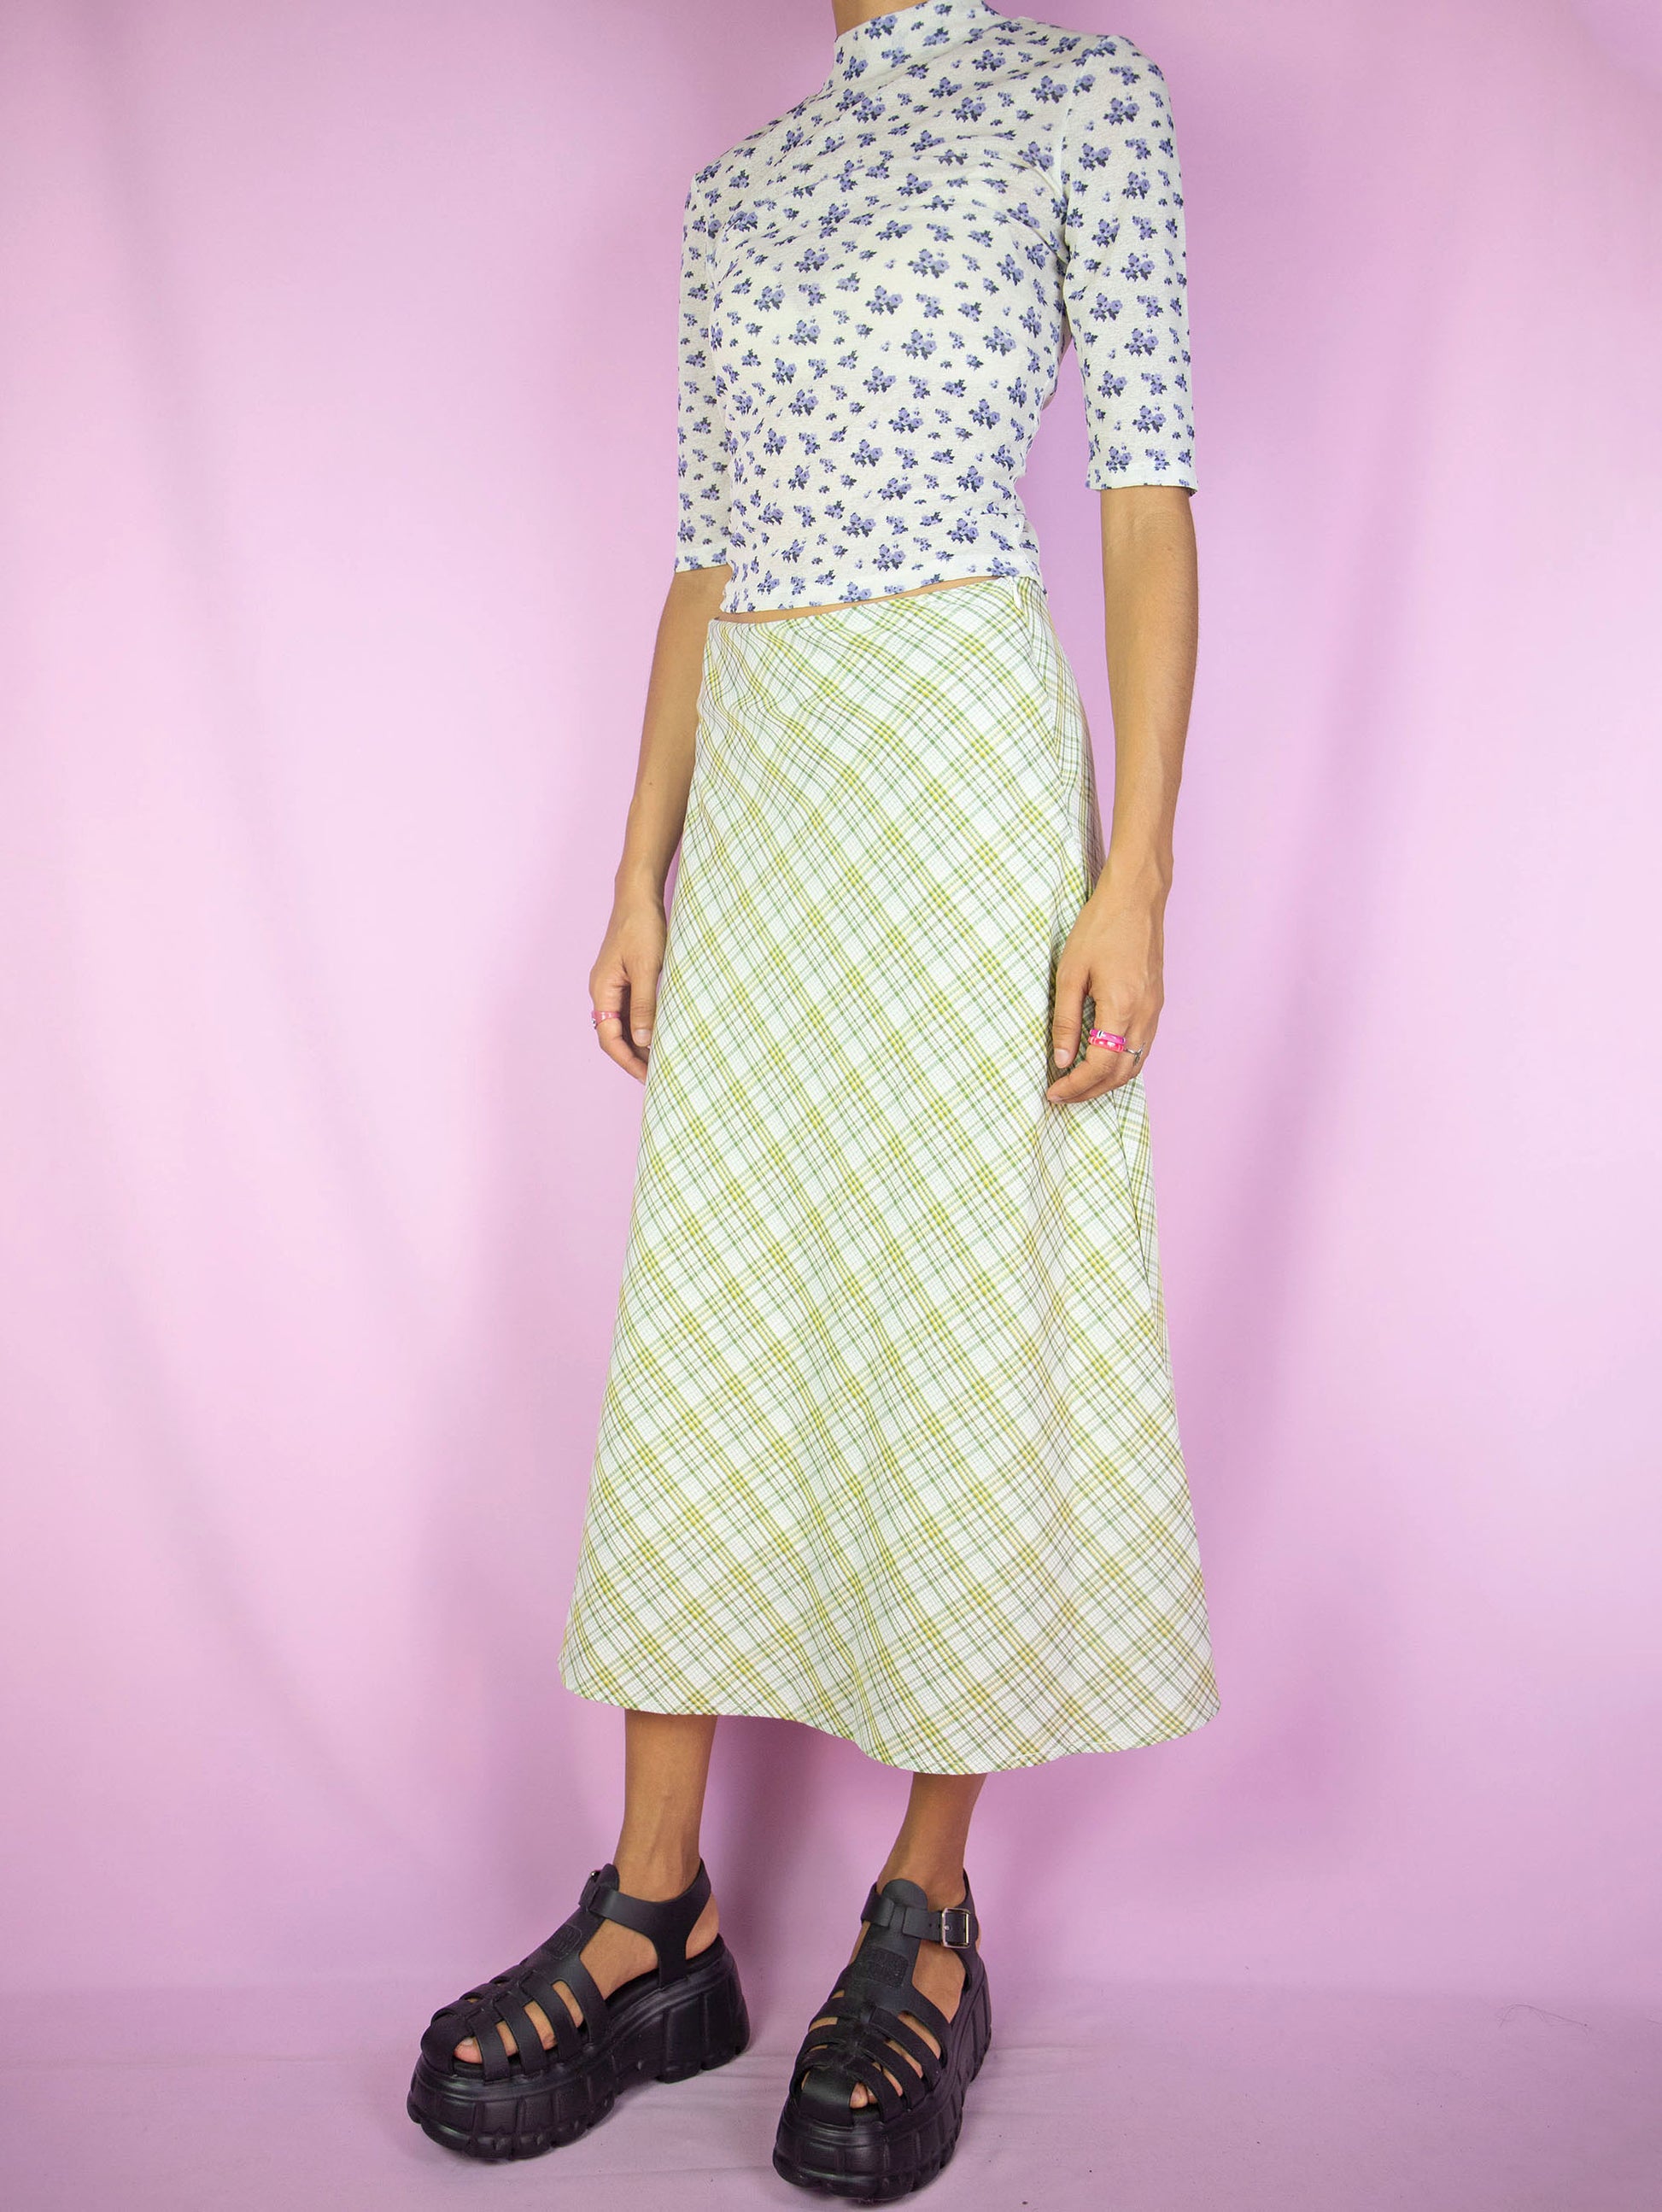 The Y2K Green Plaid Midi Skirt is a vintage flared beige yellow green plaid skirt with side zipper closure. Cottage prairie inspired 2000s boho preppy check maxi skirt.